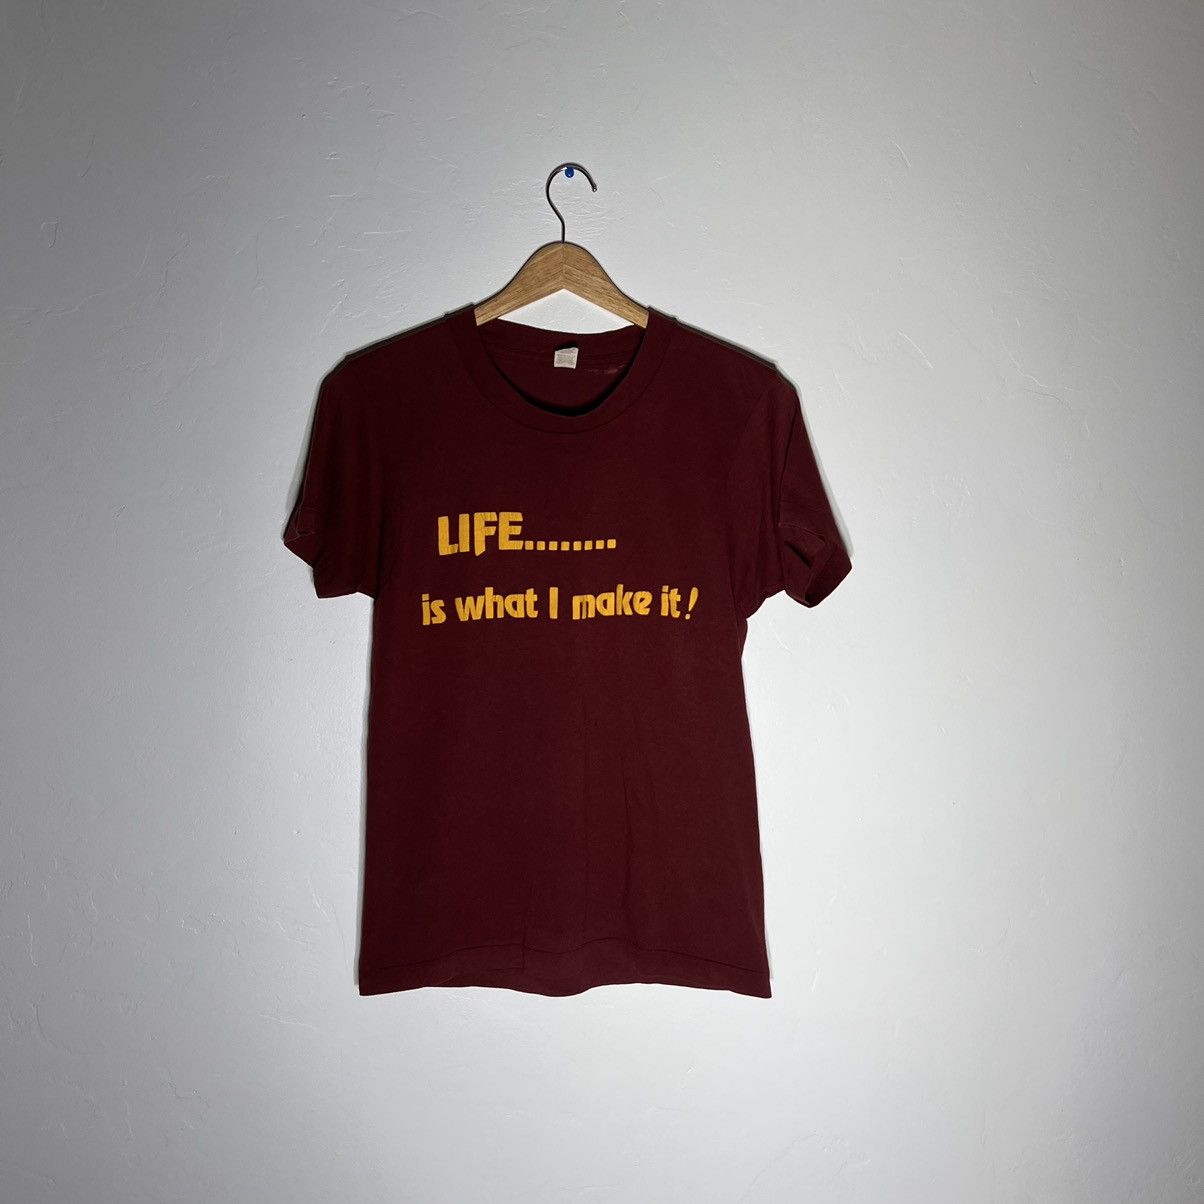 Vintage 80’s “Life is What I Make it” Tee Size US S / EU 44-46 / 1 - 1 Preview